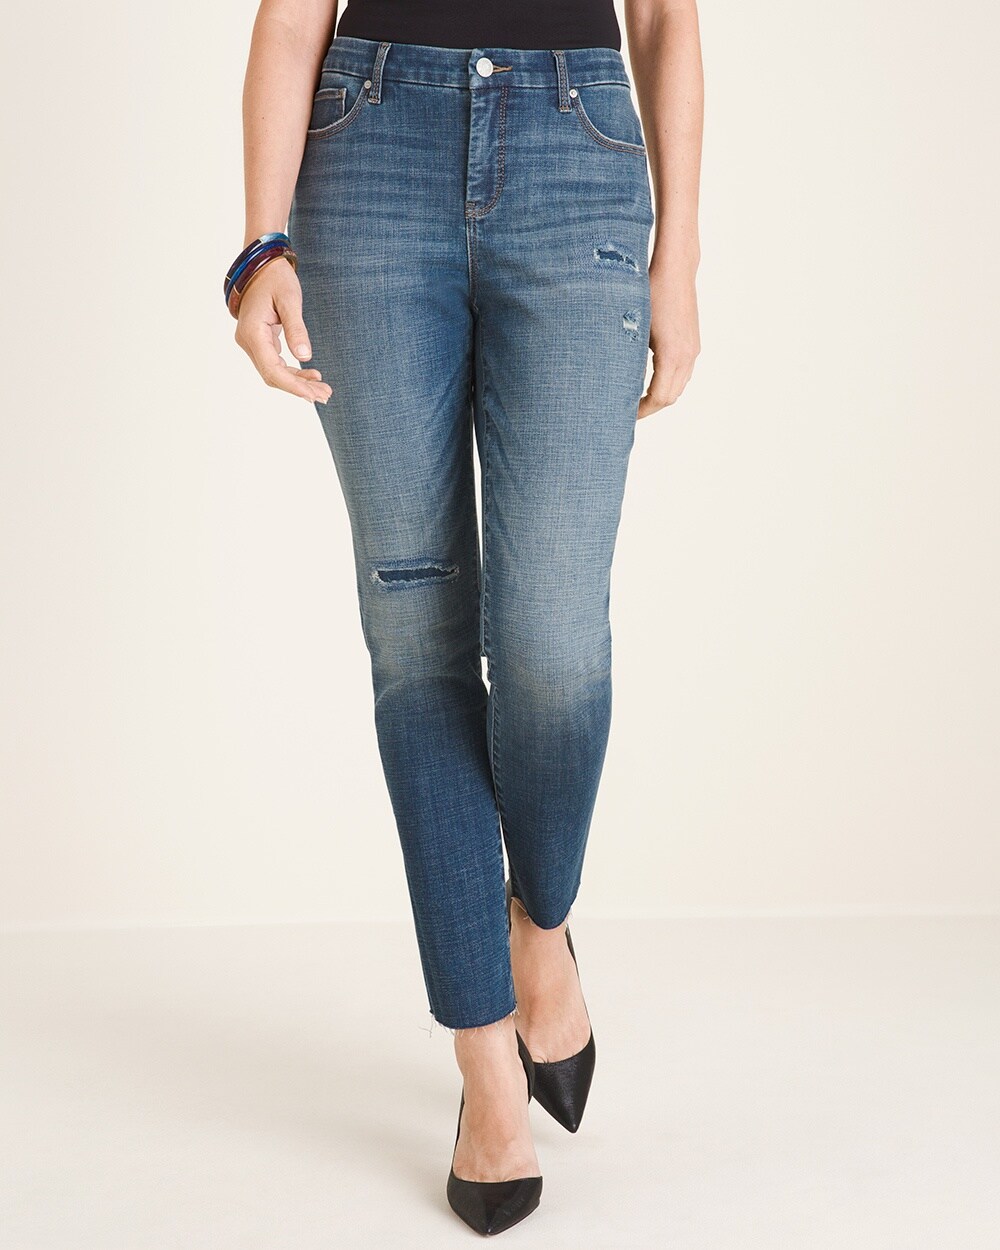 So Slimming Destructed Girlfriend Ankle Jeans